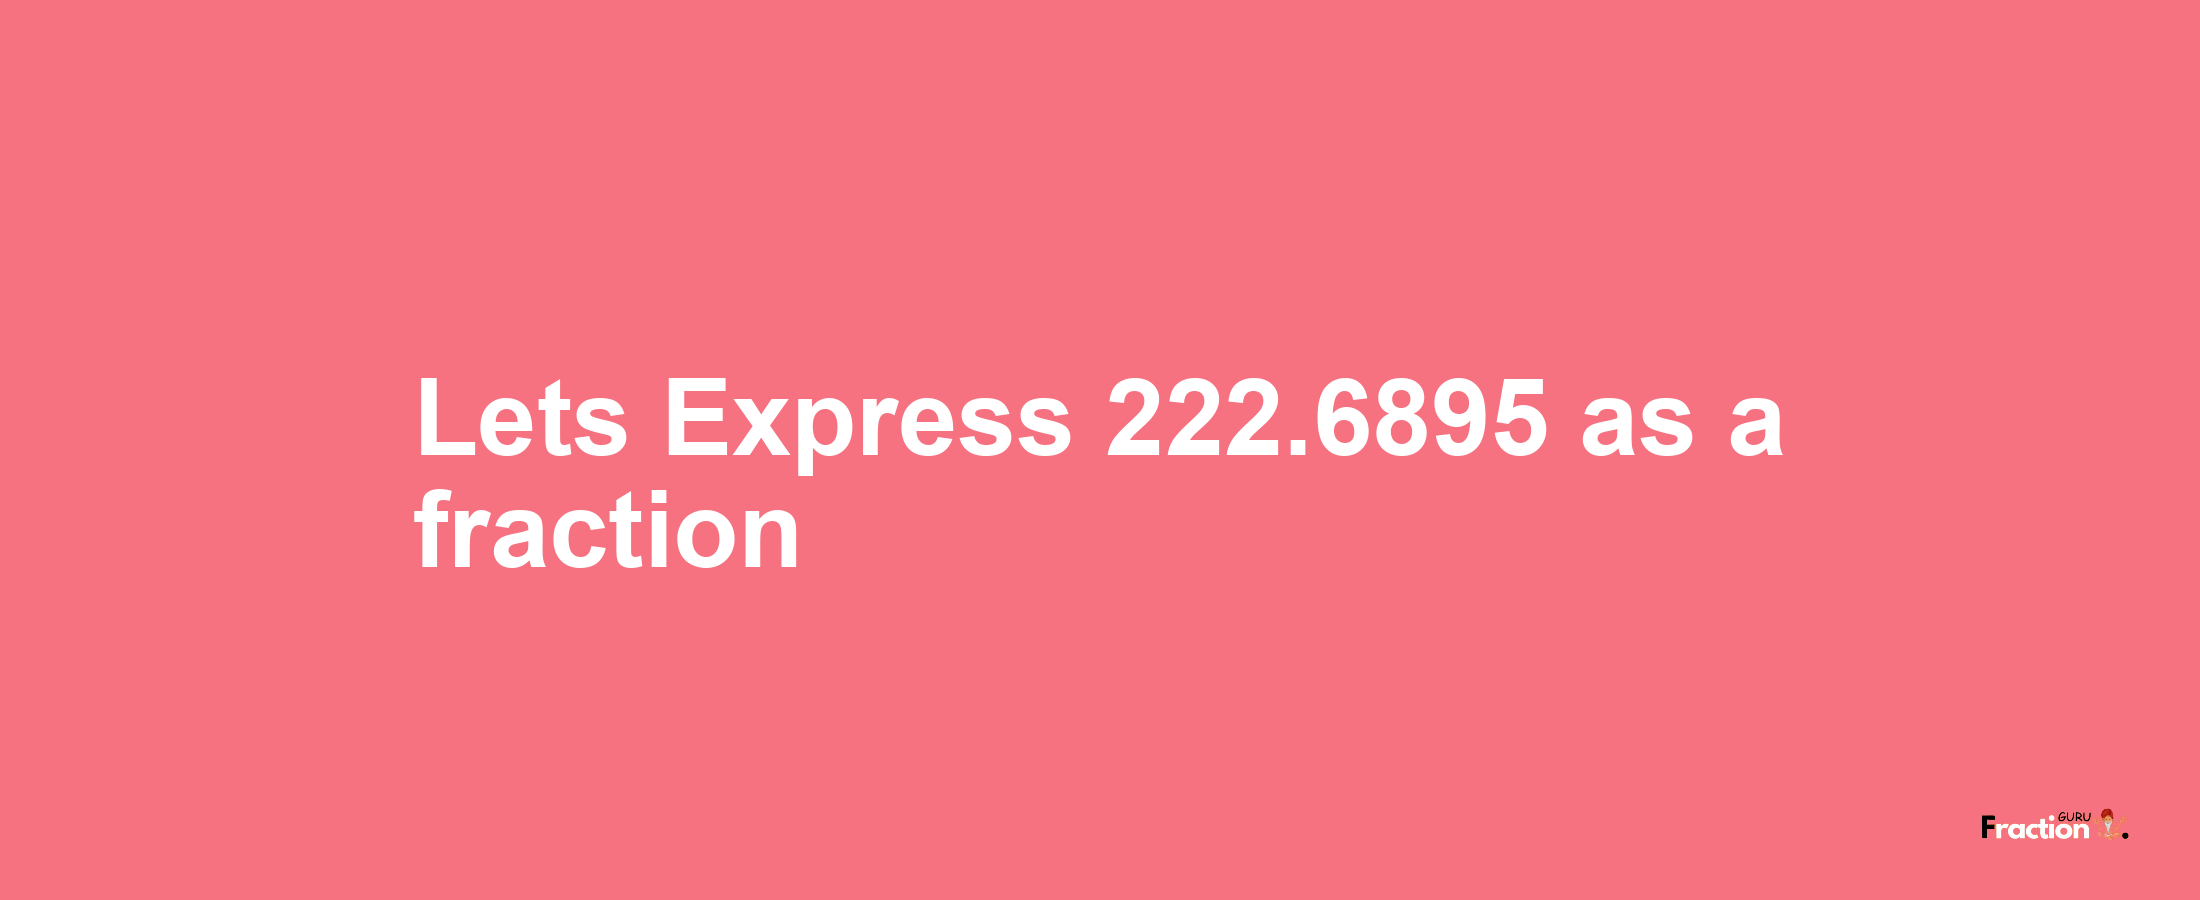 Lets Express 222.6895 as afraction